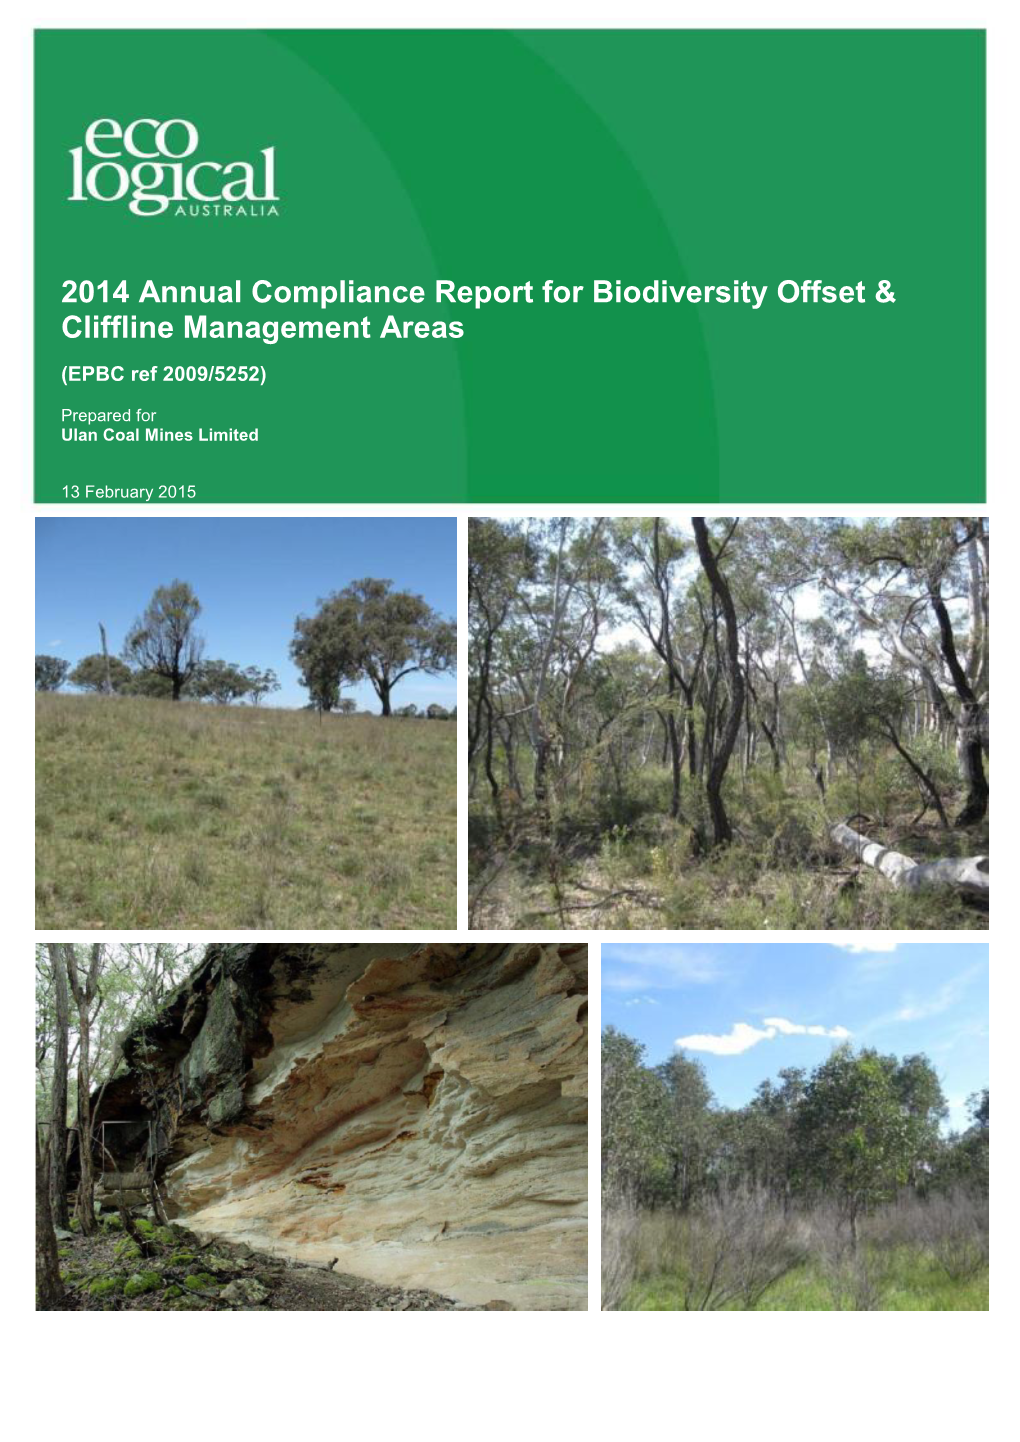 2014 Annual Compliance Report for Biodiversity Offset & Cliffline